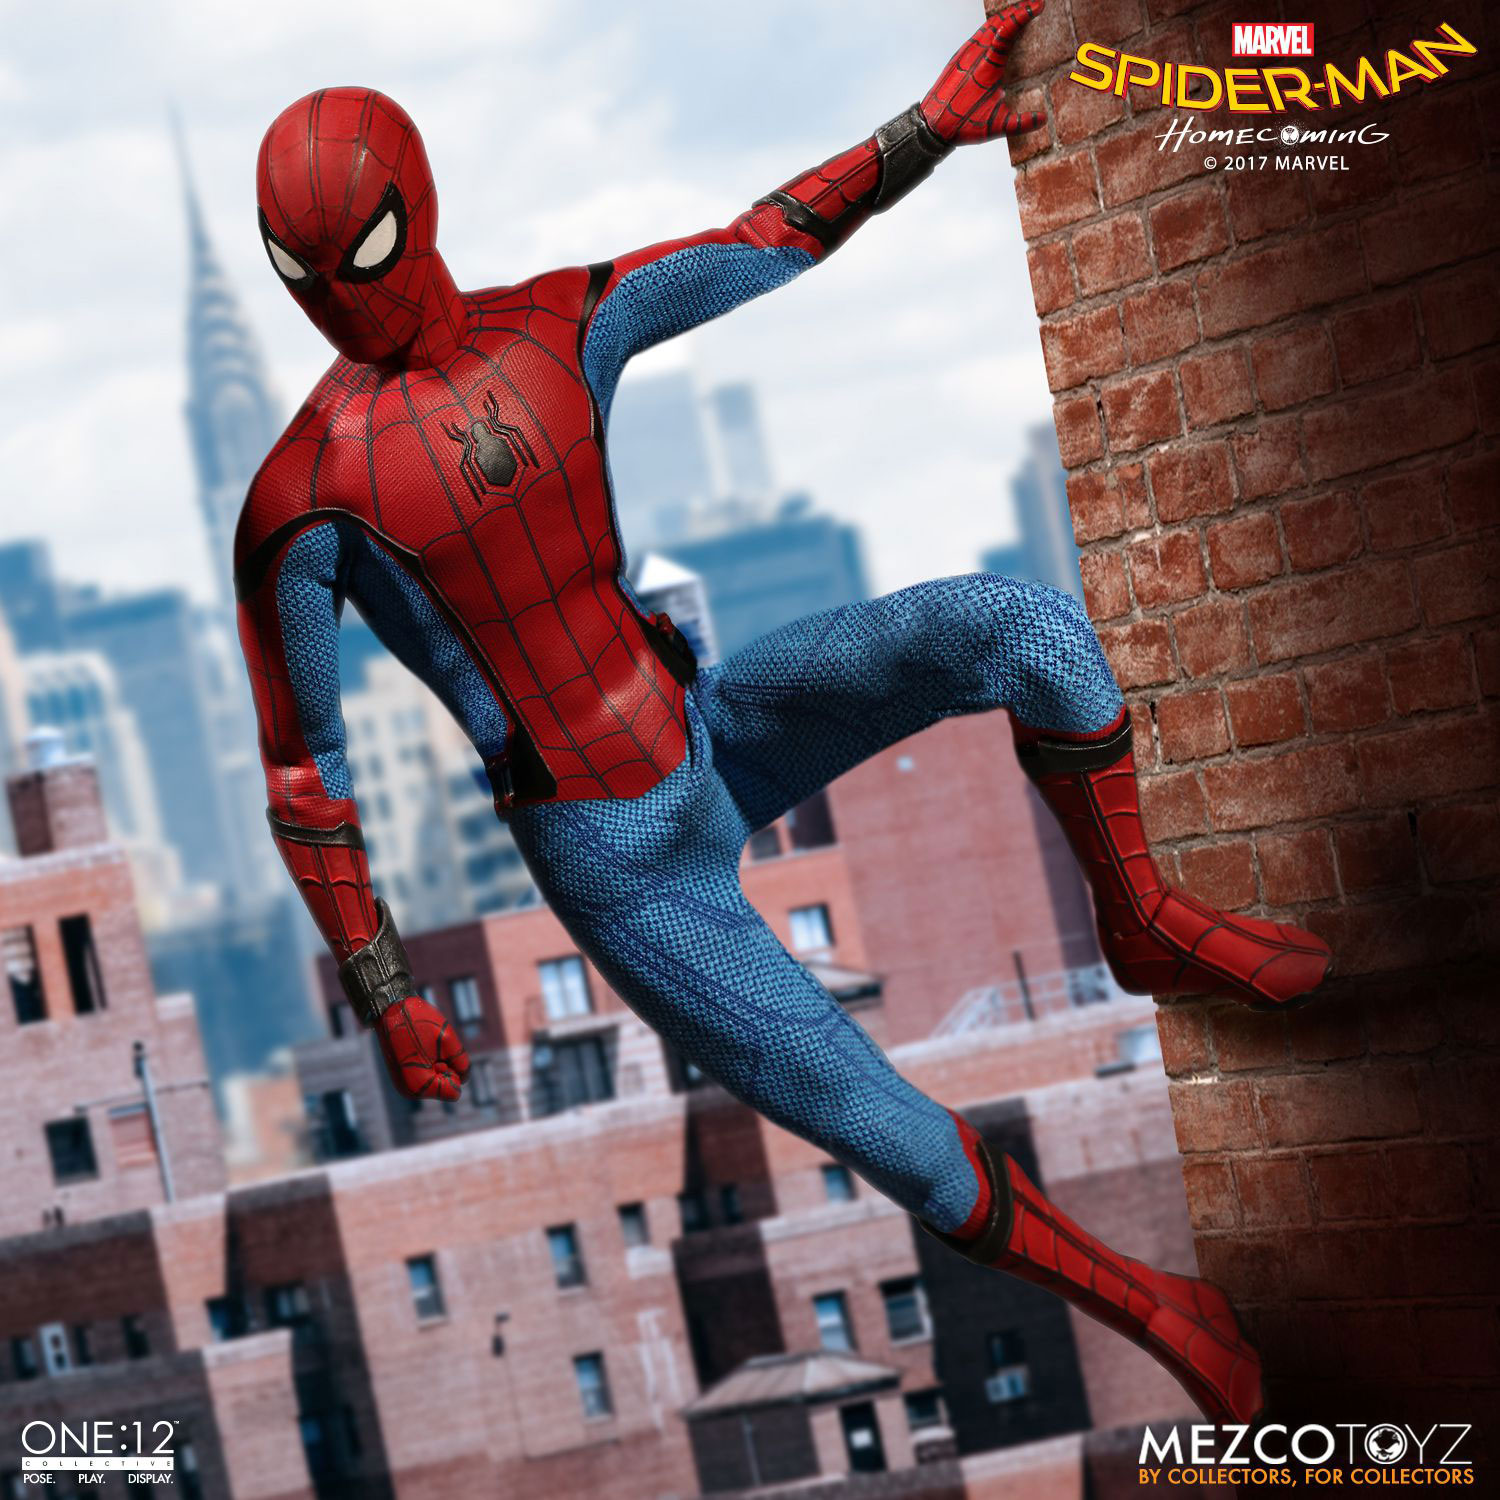 Spider-Man Homecoming One:12 Collective Action Figure by Mezco Toyz ... - SpiDerman Homecoming Mezco One 12 Collective Action Figure 3